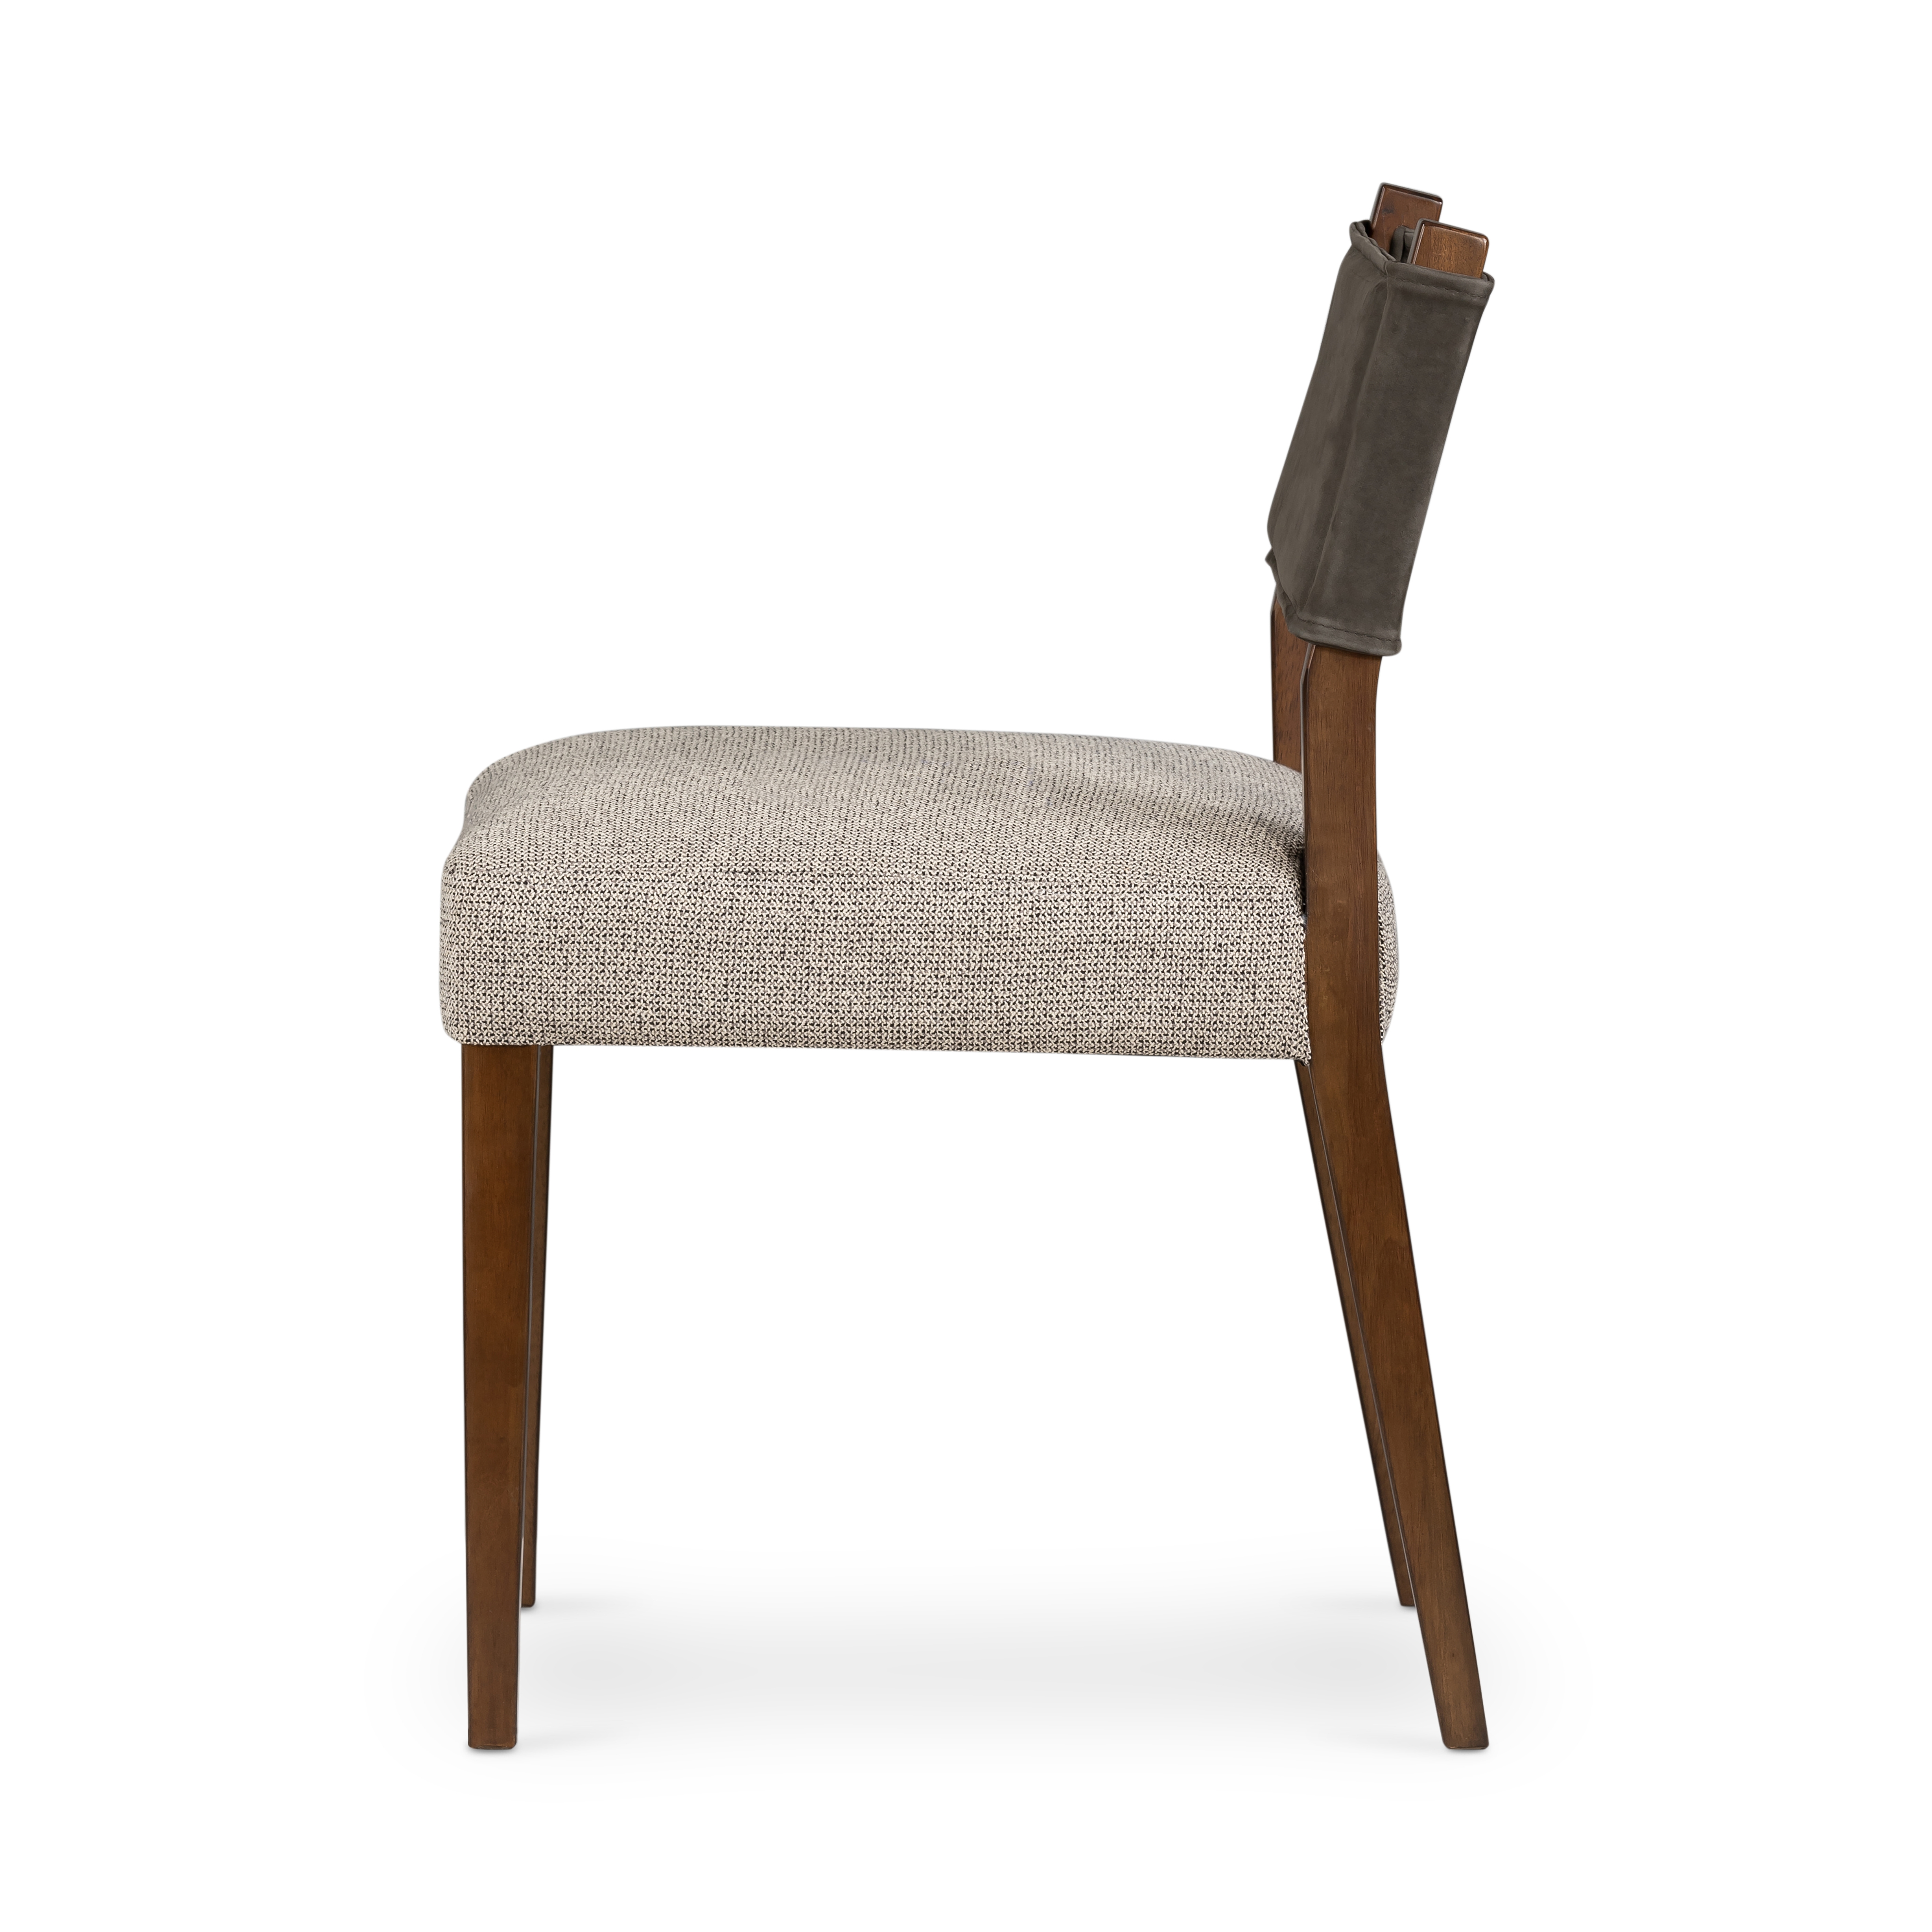 Ferris Dining Chair-Nubuck Charcoal - Image 4